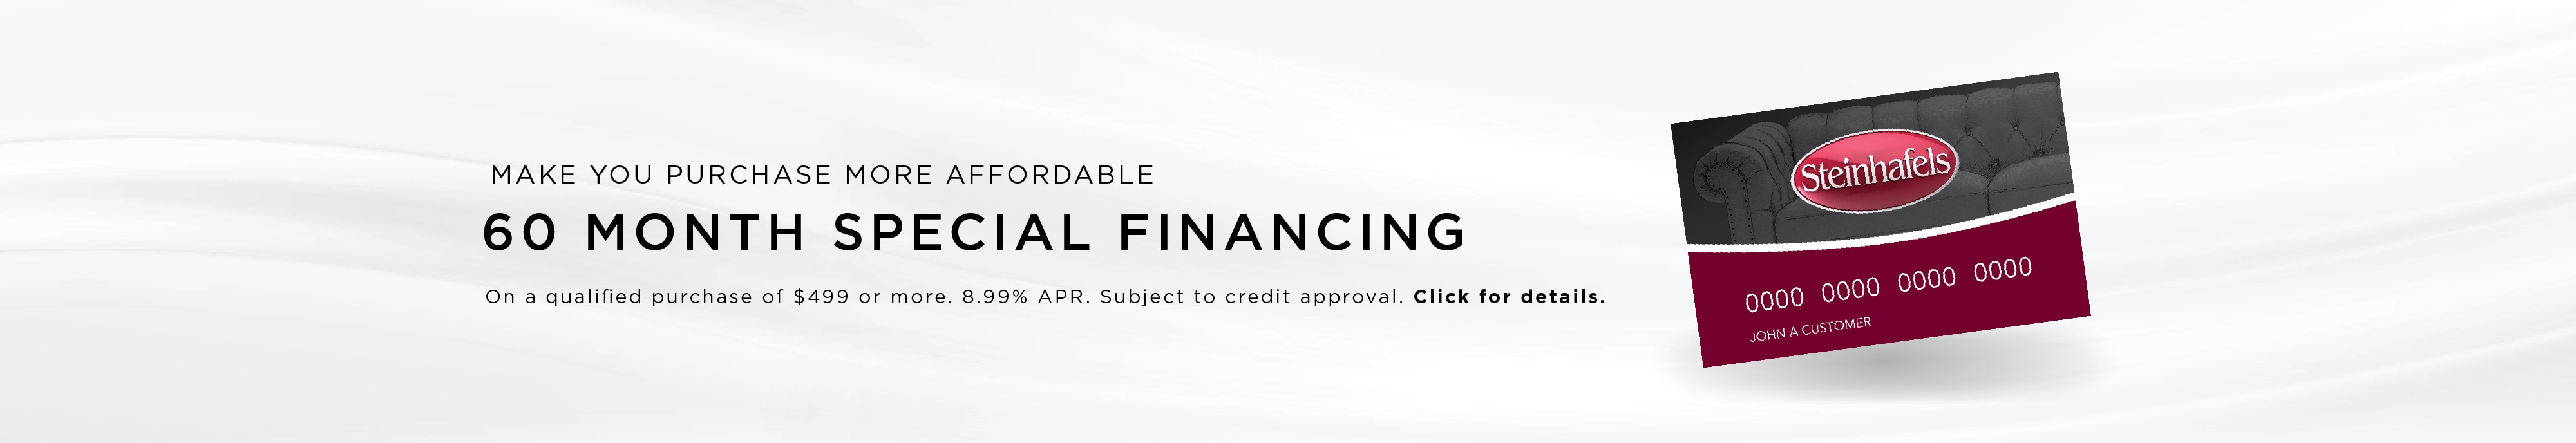 Special 60 Month Financing